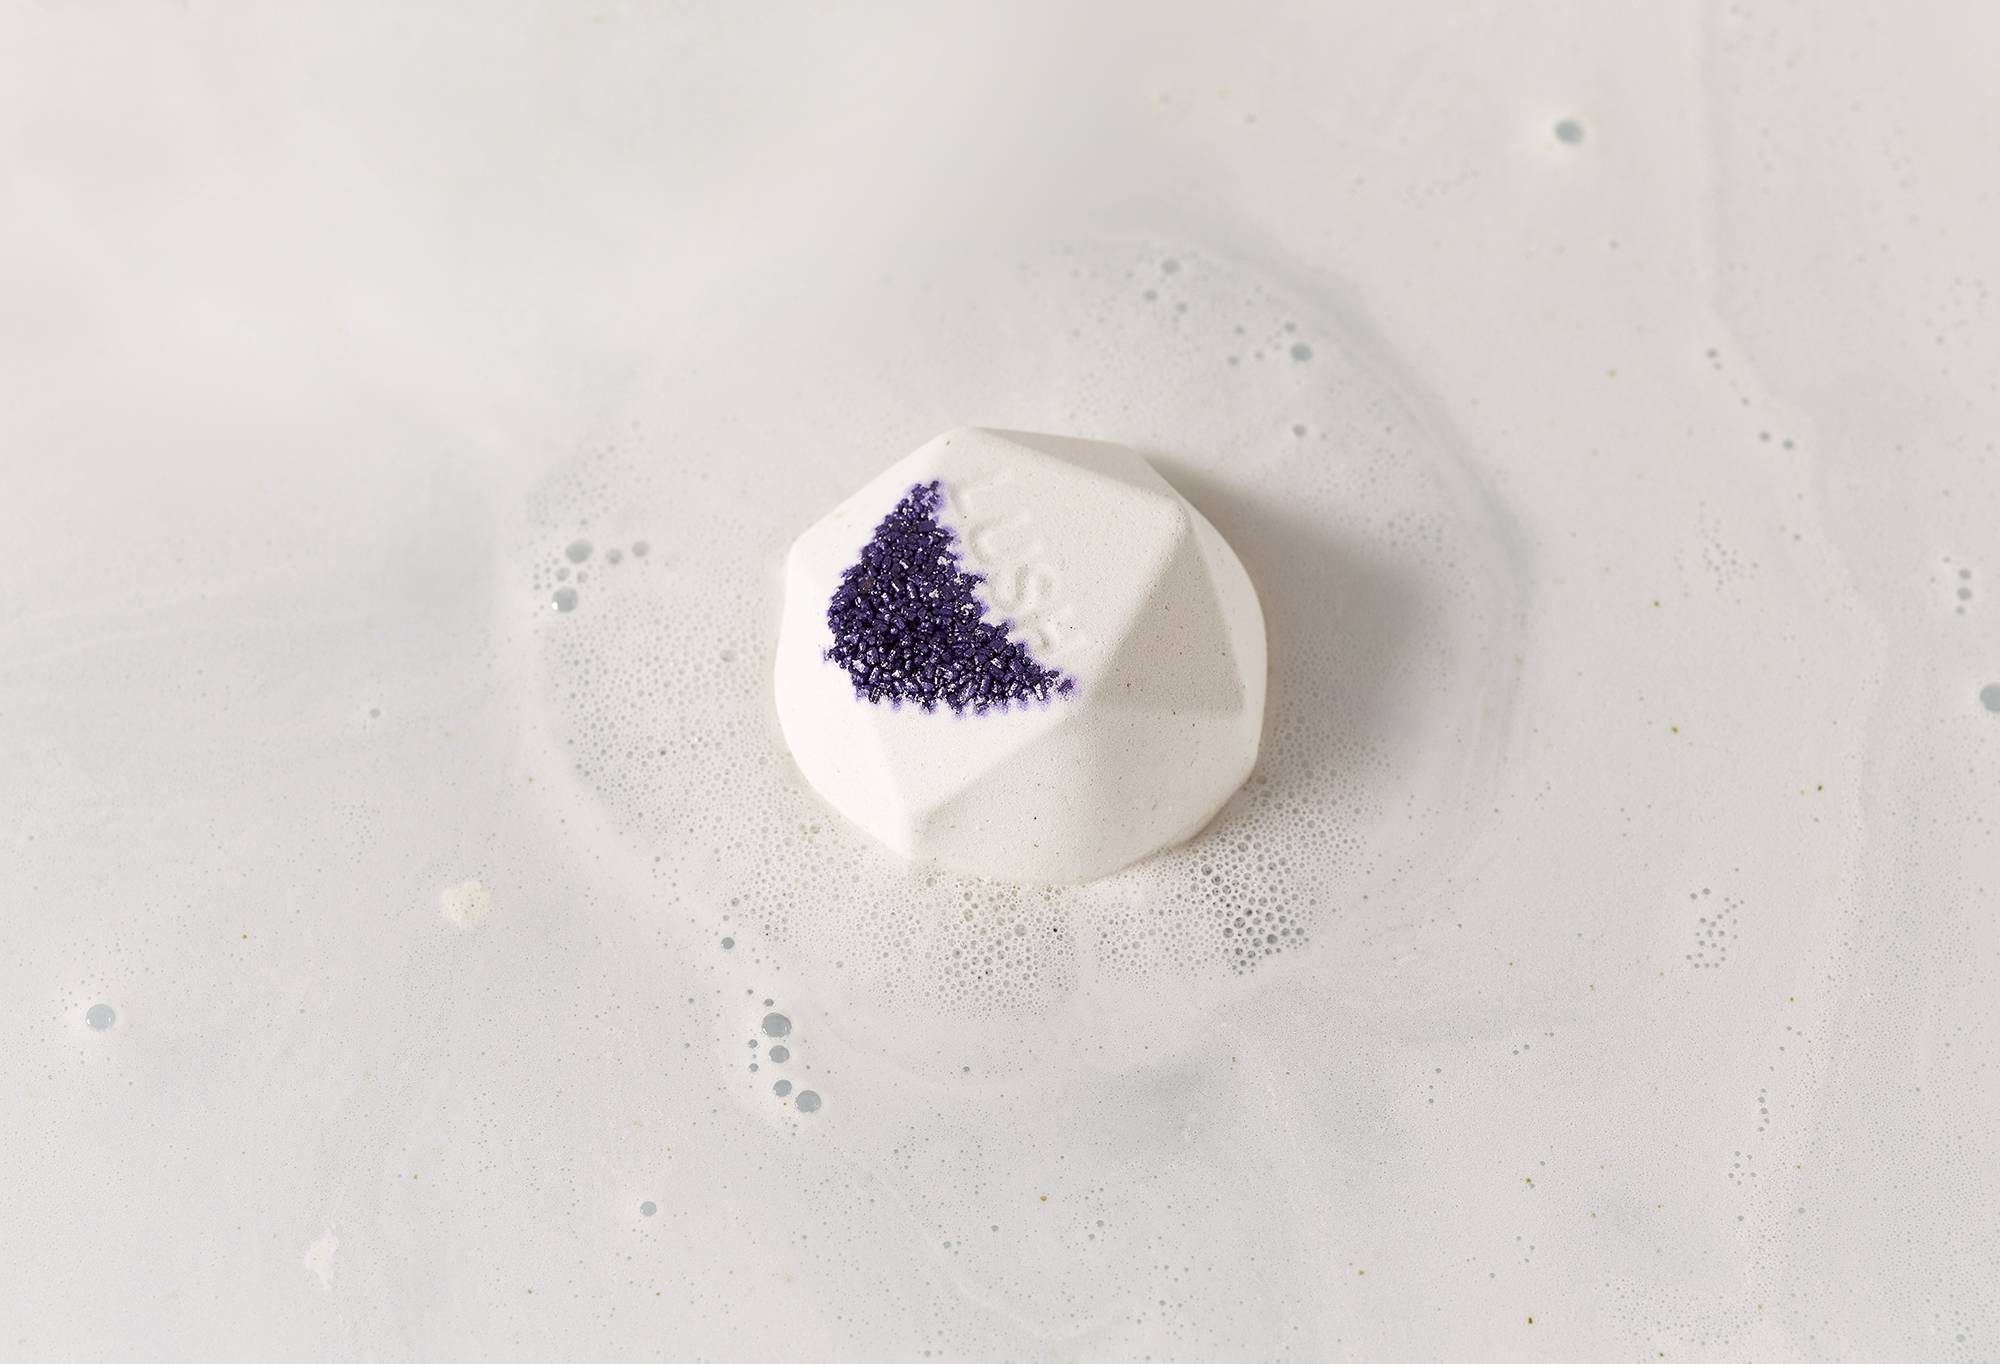 Fuurin bath bomb sits on calm, silky, white water with purple-coloured salt and "Lush" embossed on top. 